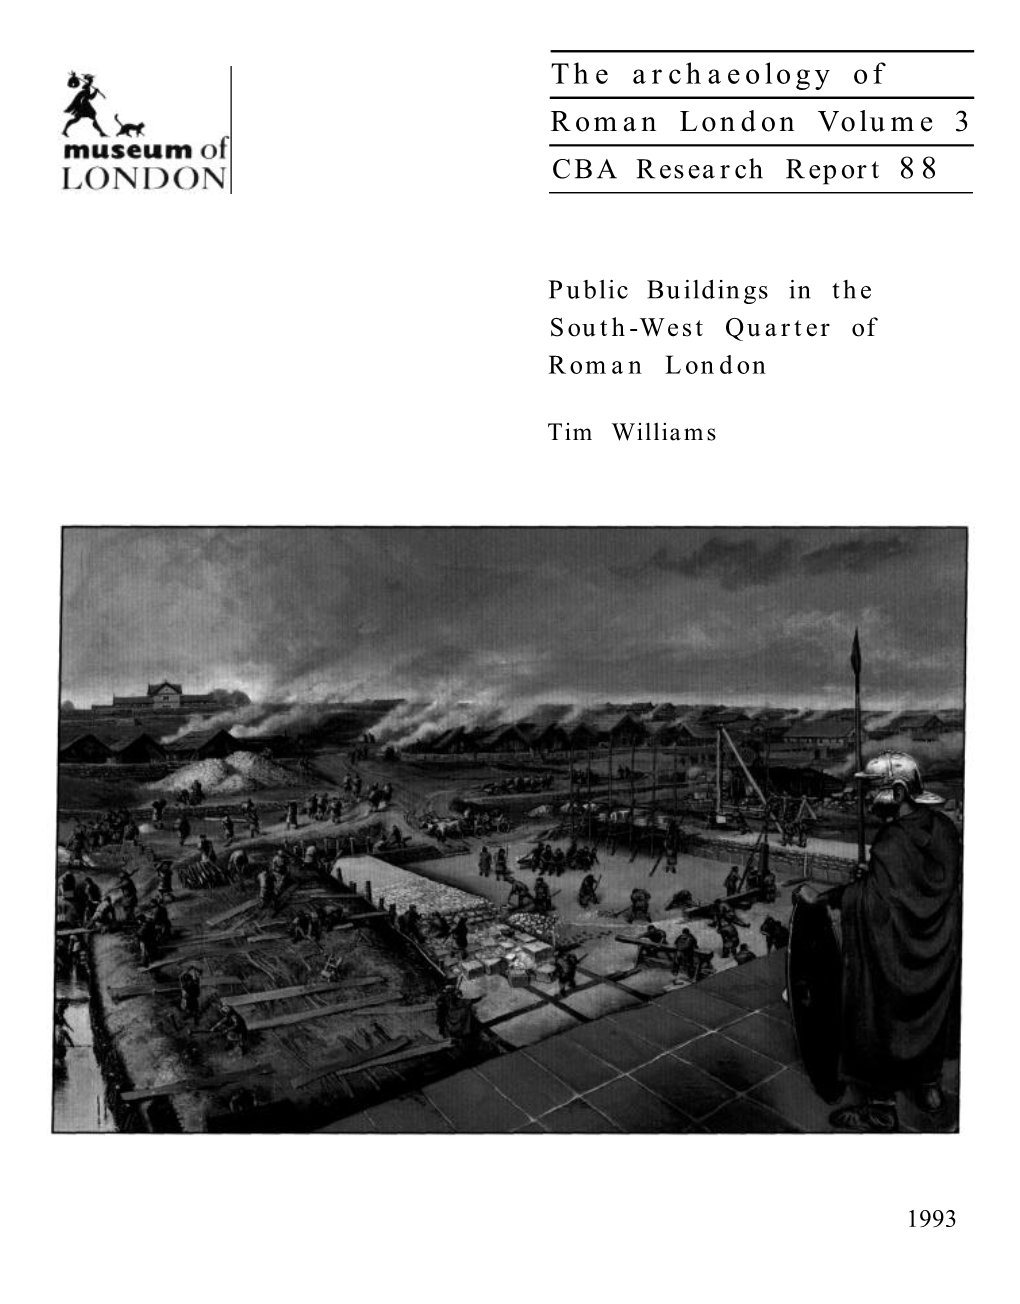 The Archaeology of Roman London Volume 3 CBA Research Report 88